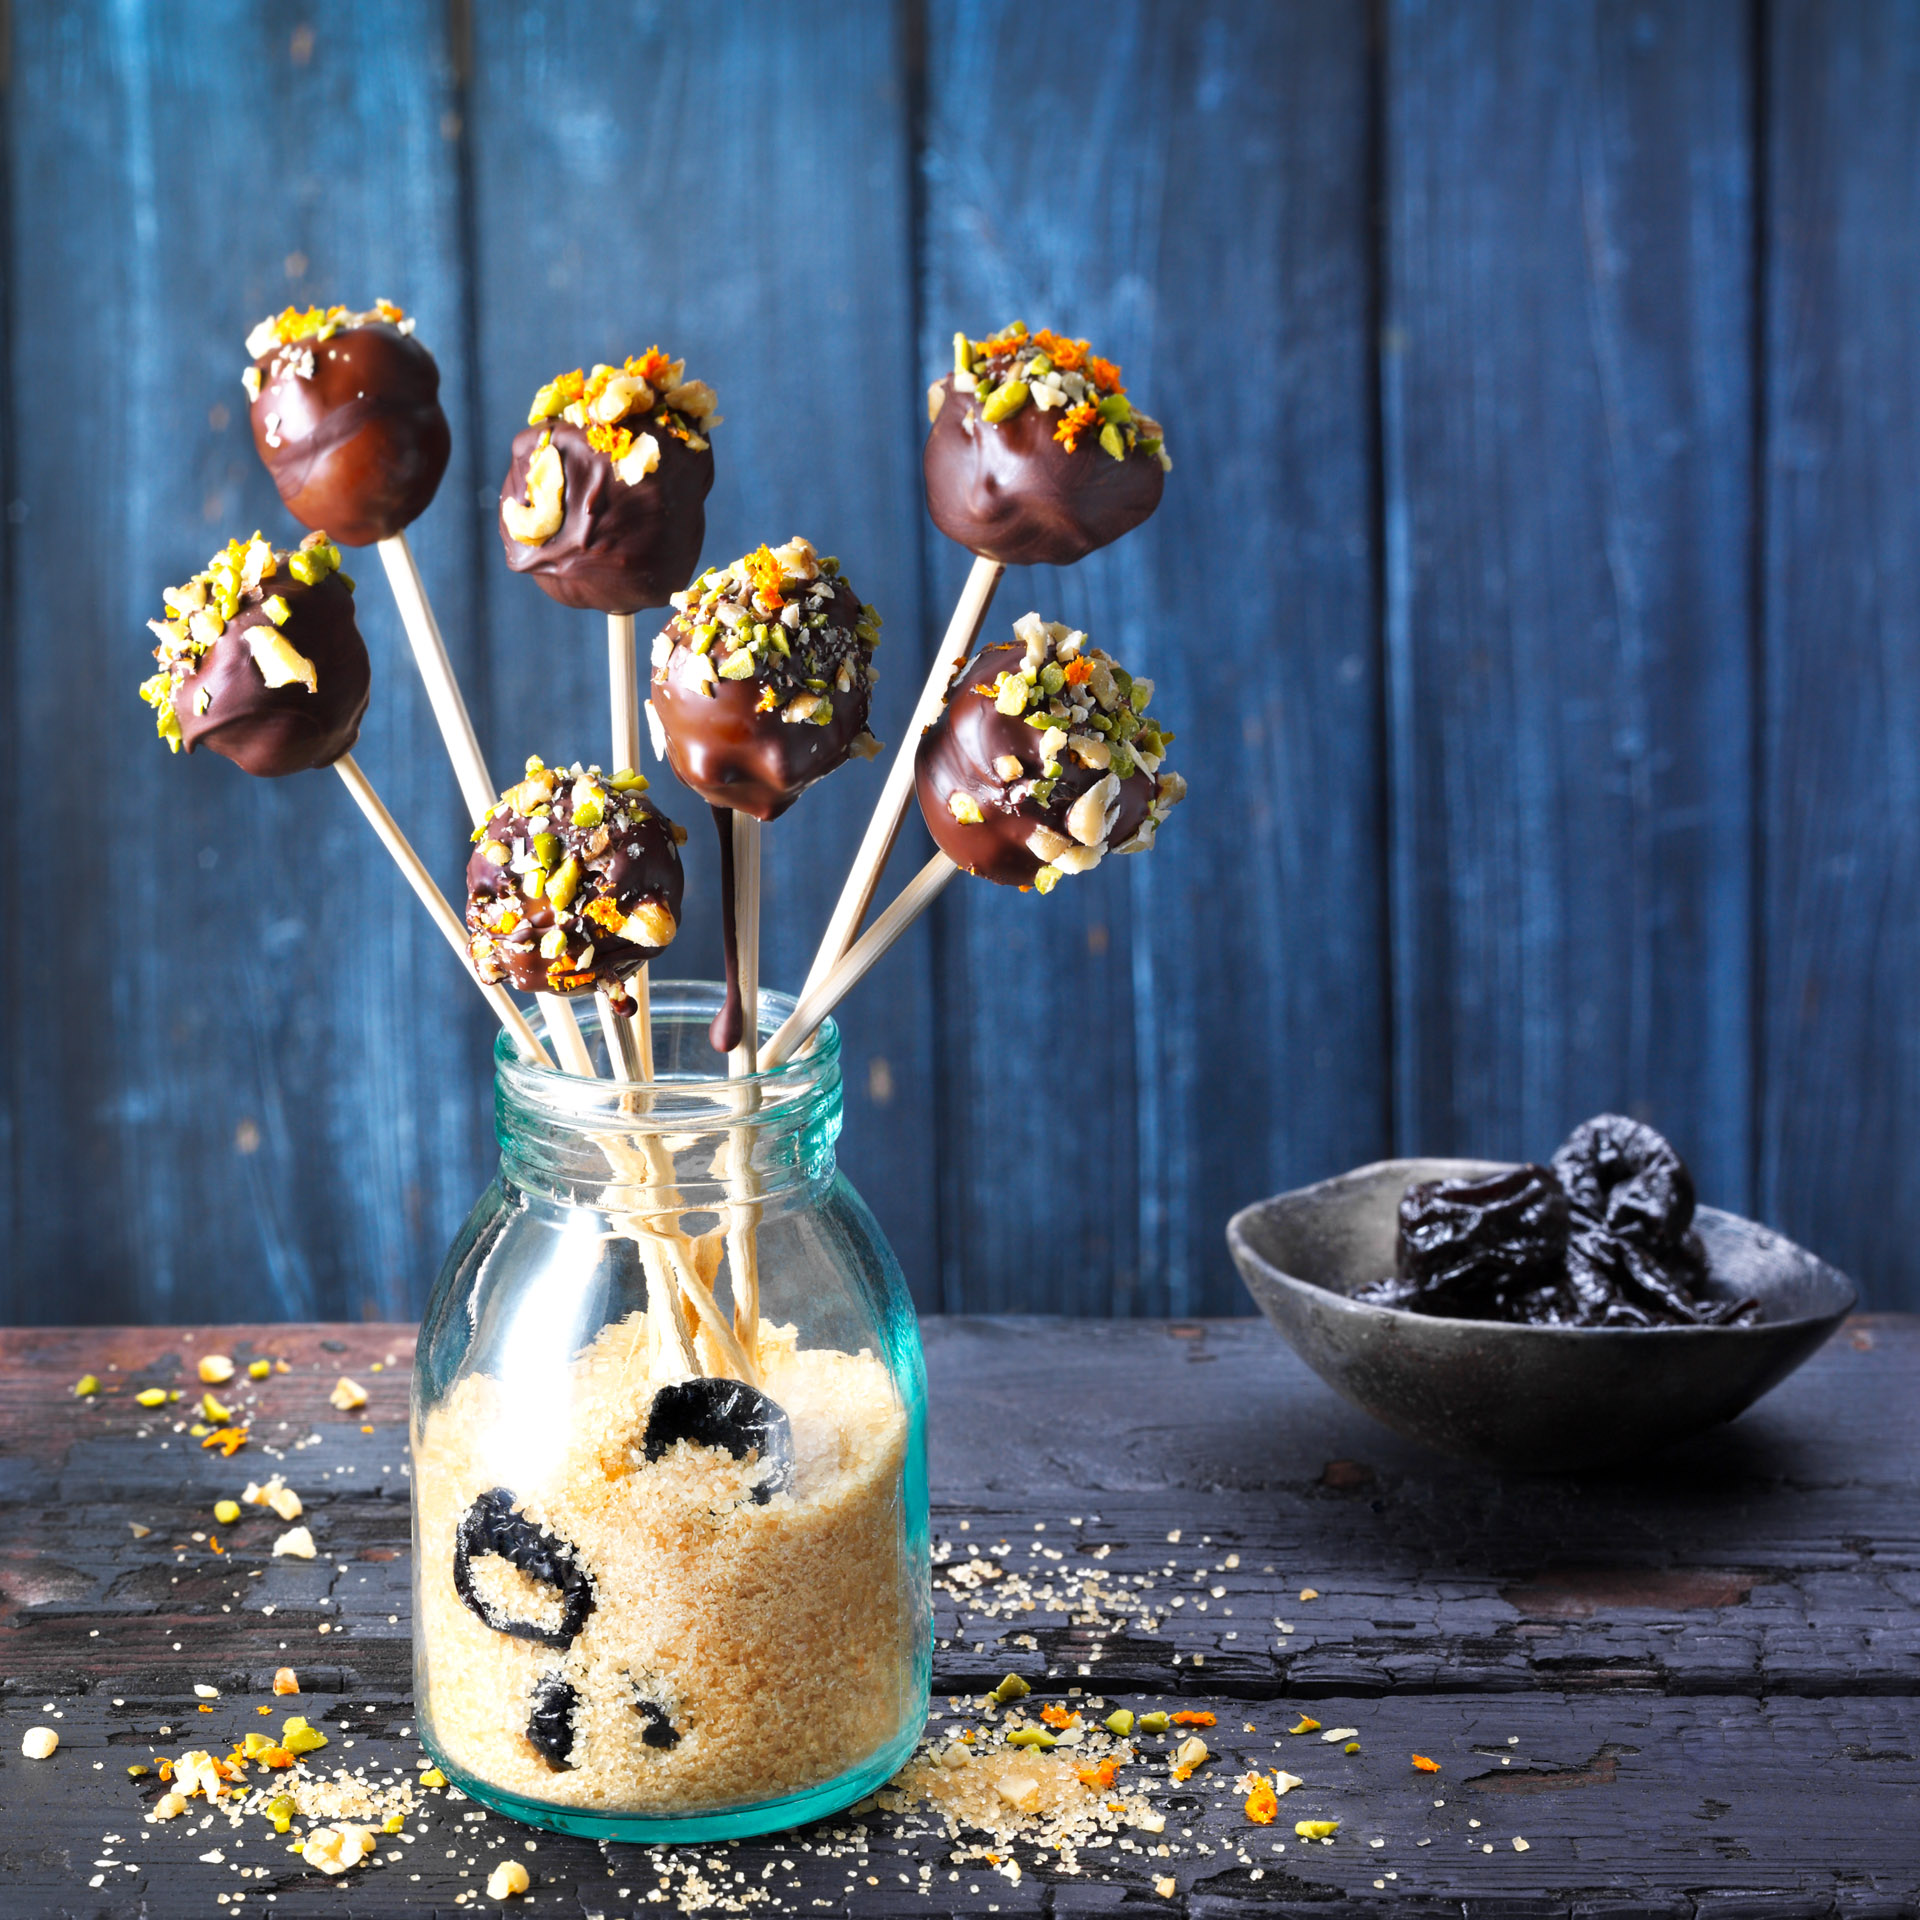 Marzipan, orange, and a trio of nuts form the filling for these prune and and chocolate lollipops. For coating the lollipops, source couverture chocolate, which has a higher percentage of cocoa butter and is ideal for tempering and dipping.